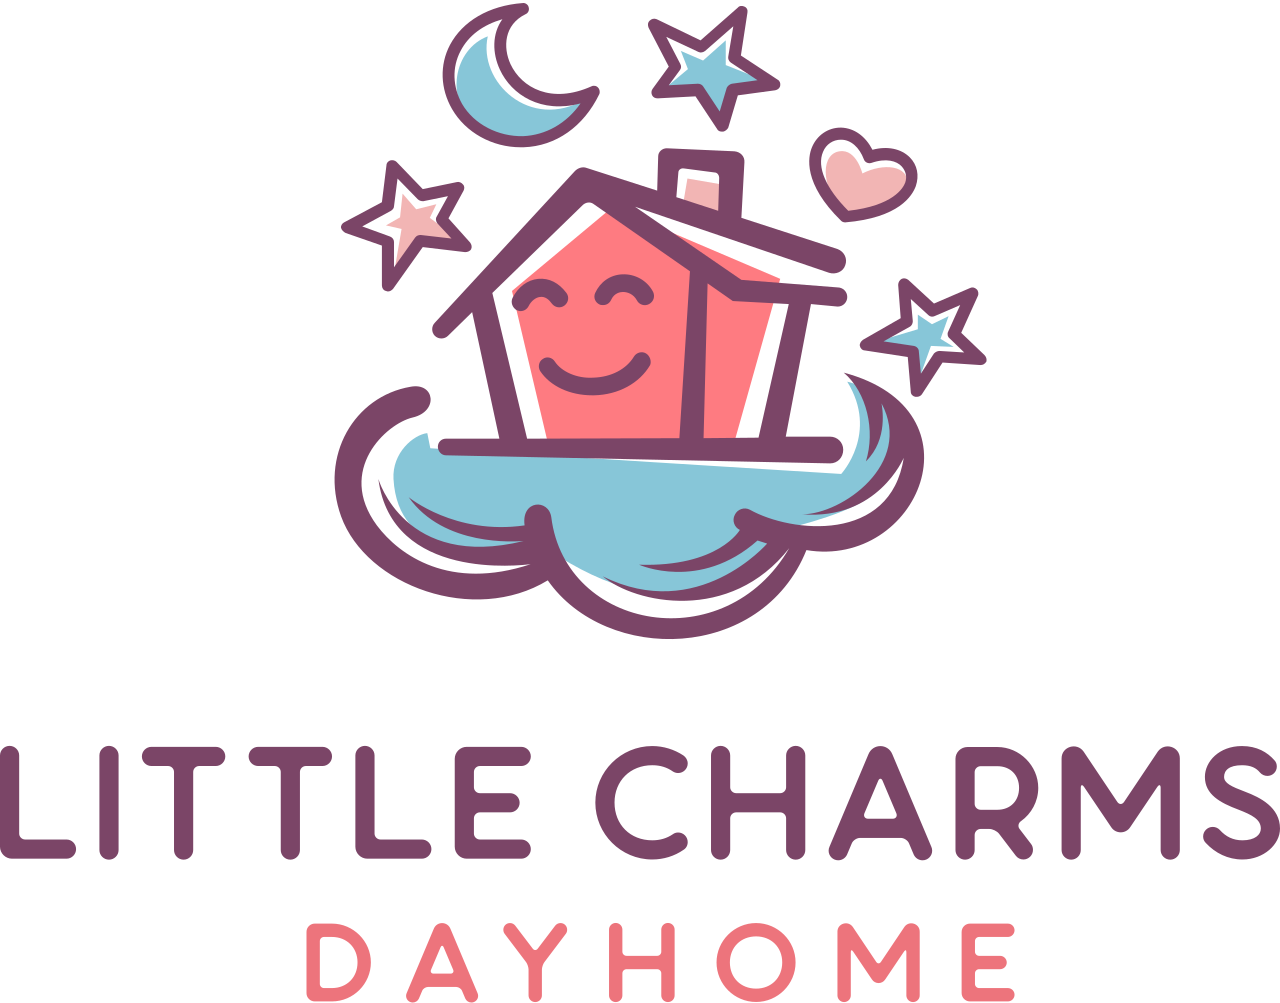 Little Charms 's logo